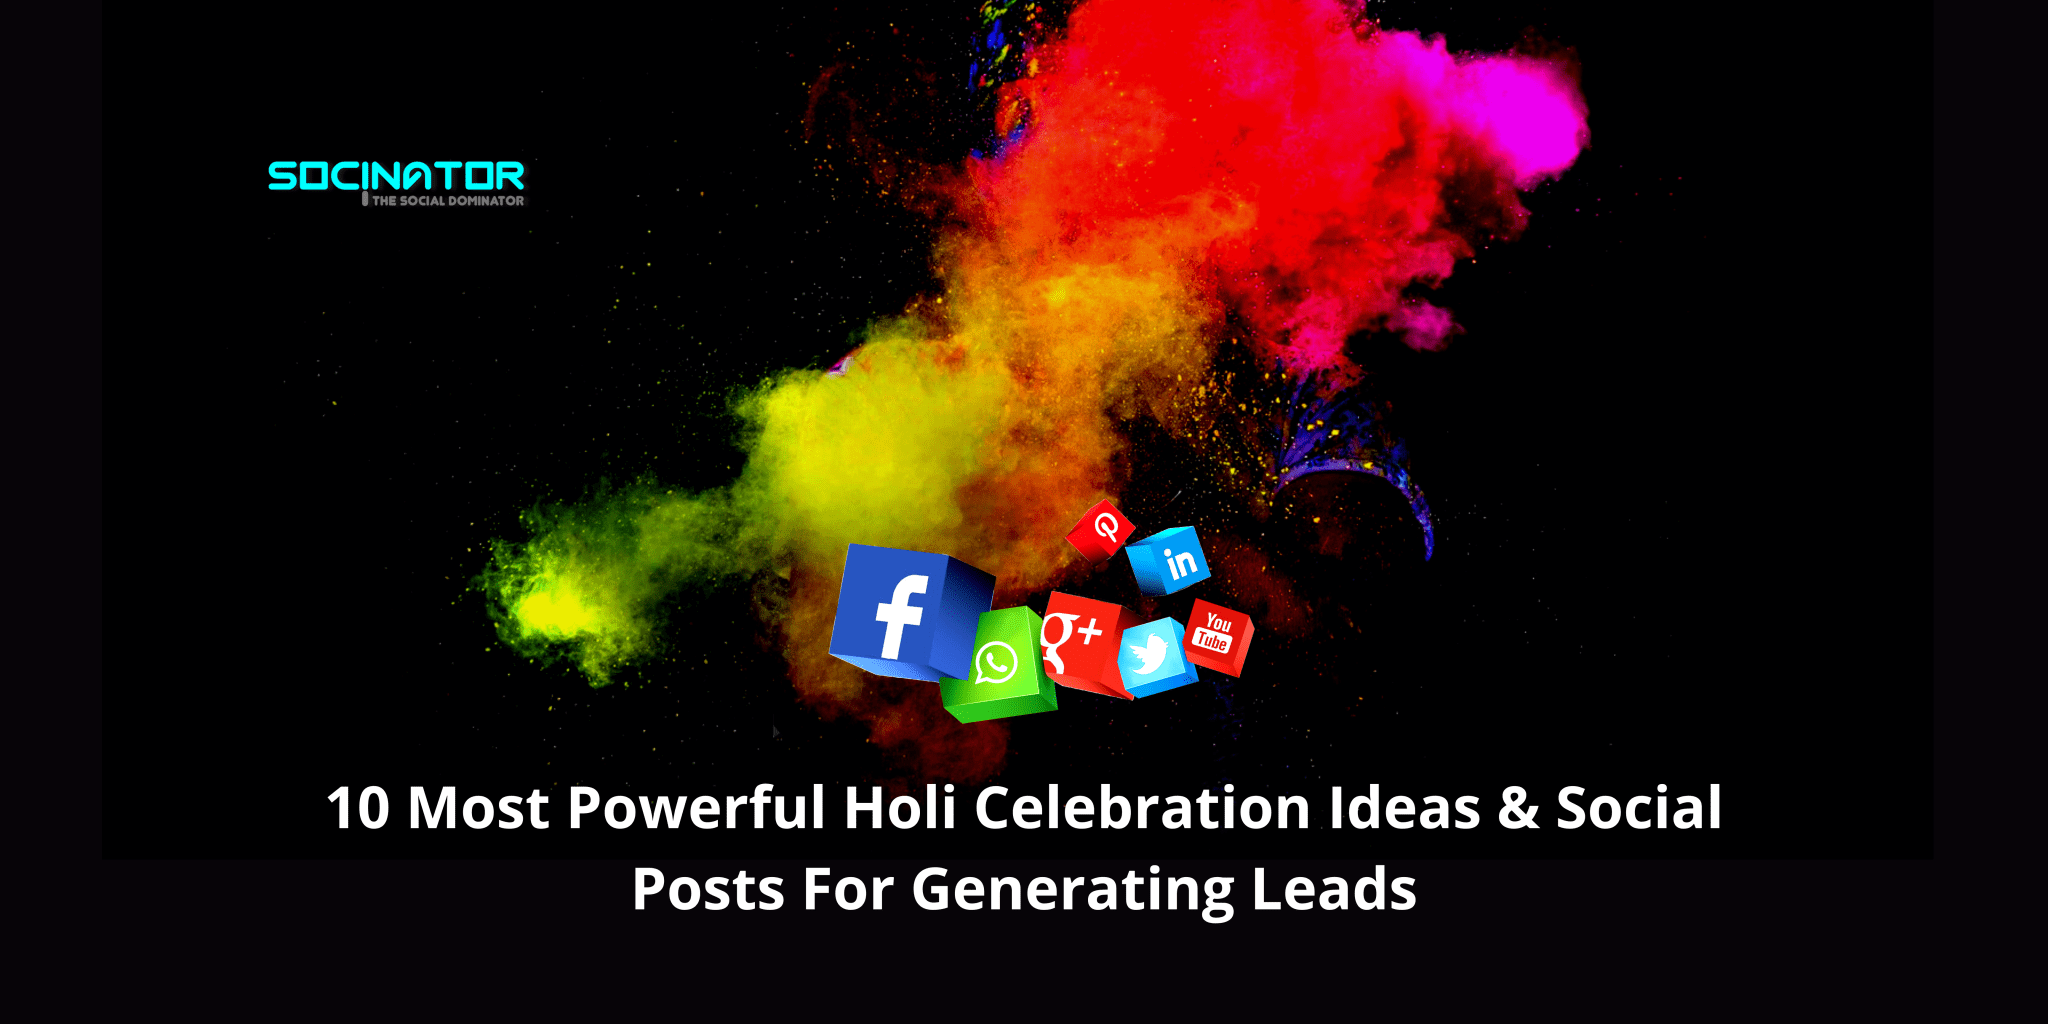 10 Most Powerful Holi Celebration Ideas & Social Posts For Generating Leads